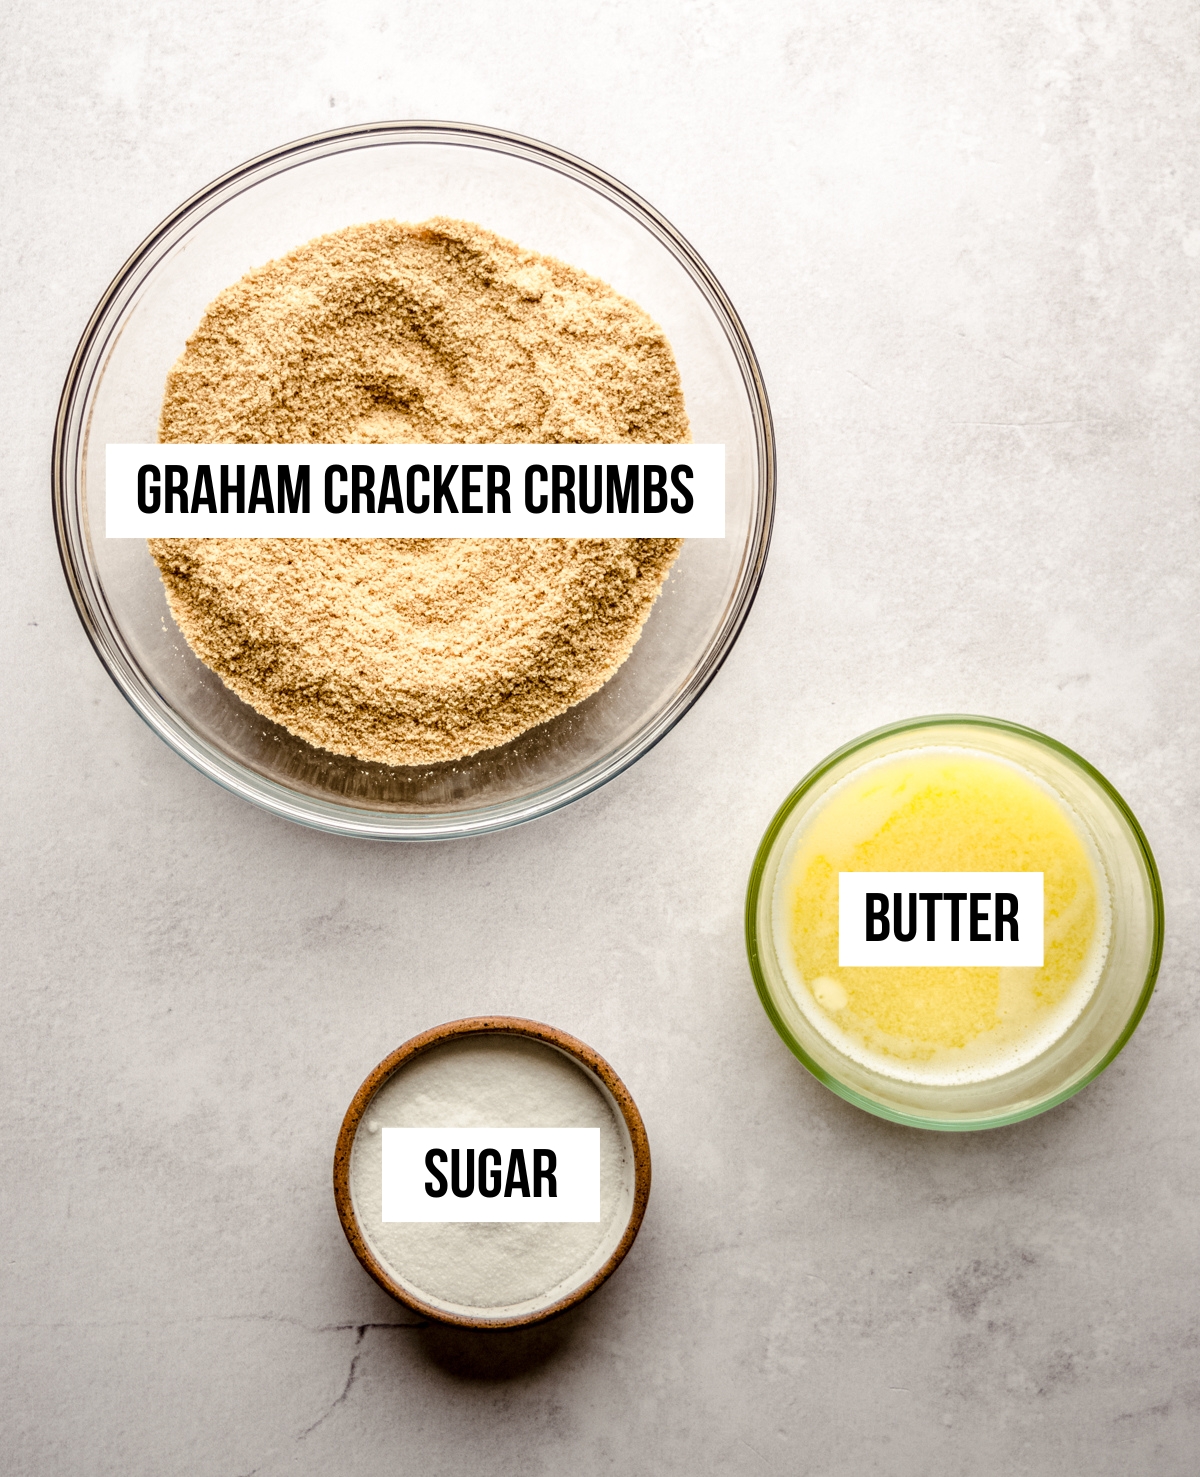 Aerial photo of ingredients for a graham cracker crust with text overlay.